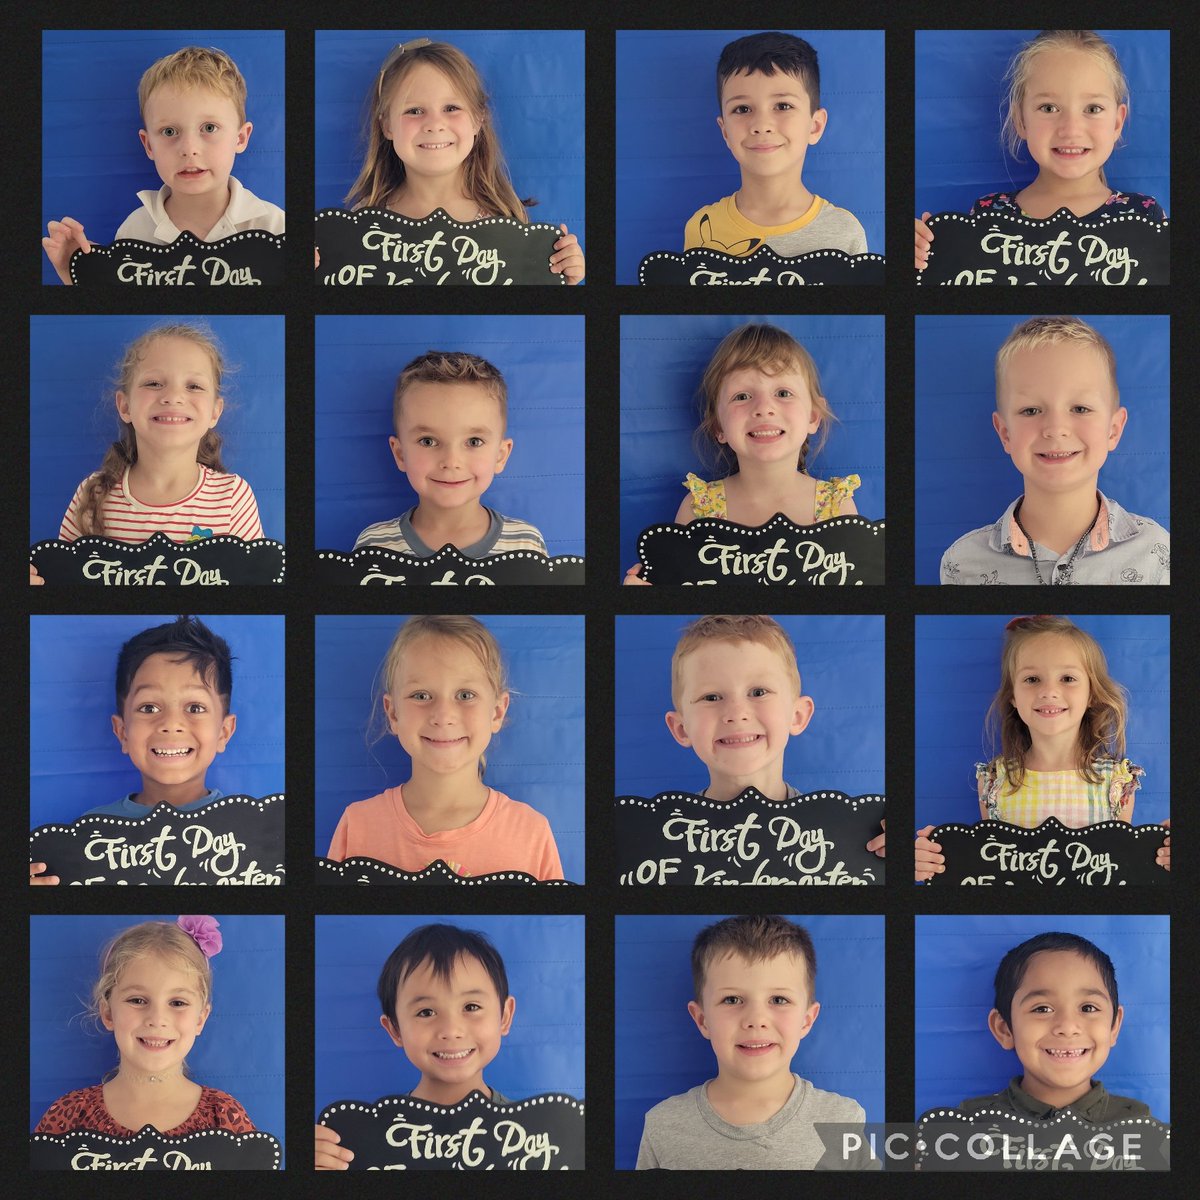 ALL smiles for ALL day Kindergarten. It's going to be a great year with this bunch! #dg58pride #LEchoosesHaPPY